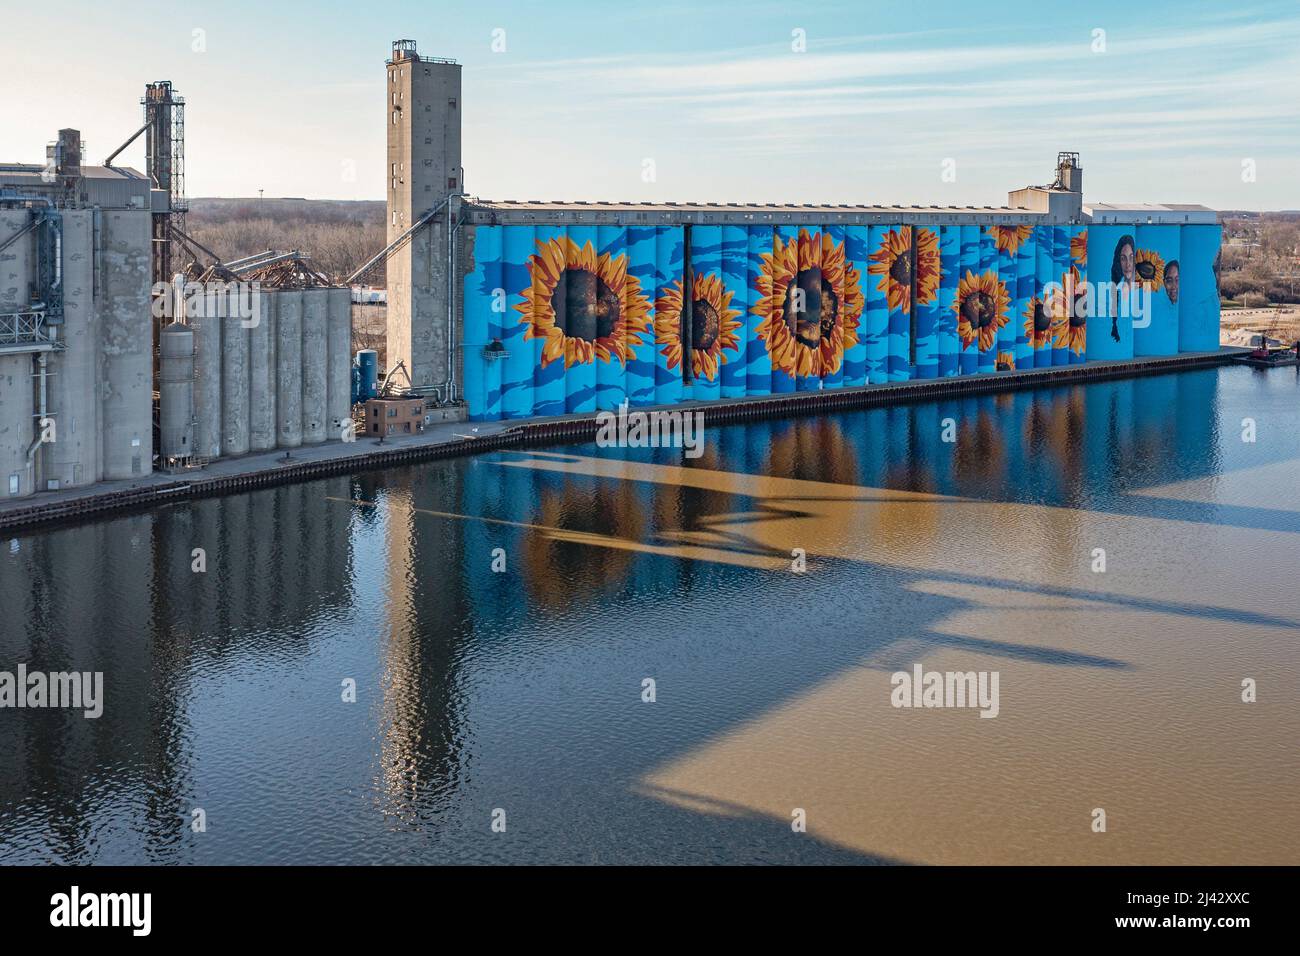 Toledo, Ohio - The Glass City River Wall, a sunflower mural by Gabe Gault, painted on the ADM grain silos on the Maumee River. Stock Photo